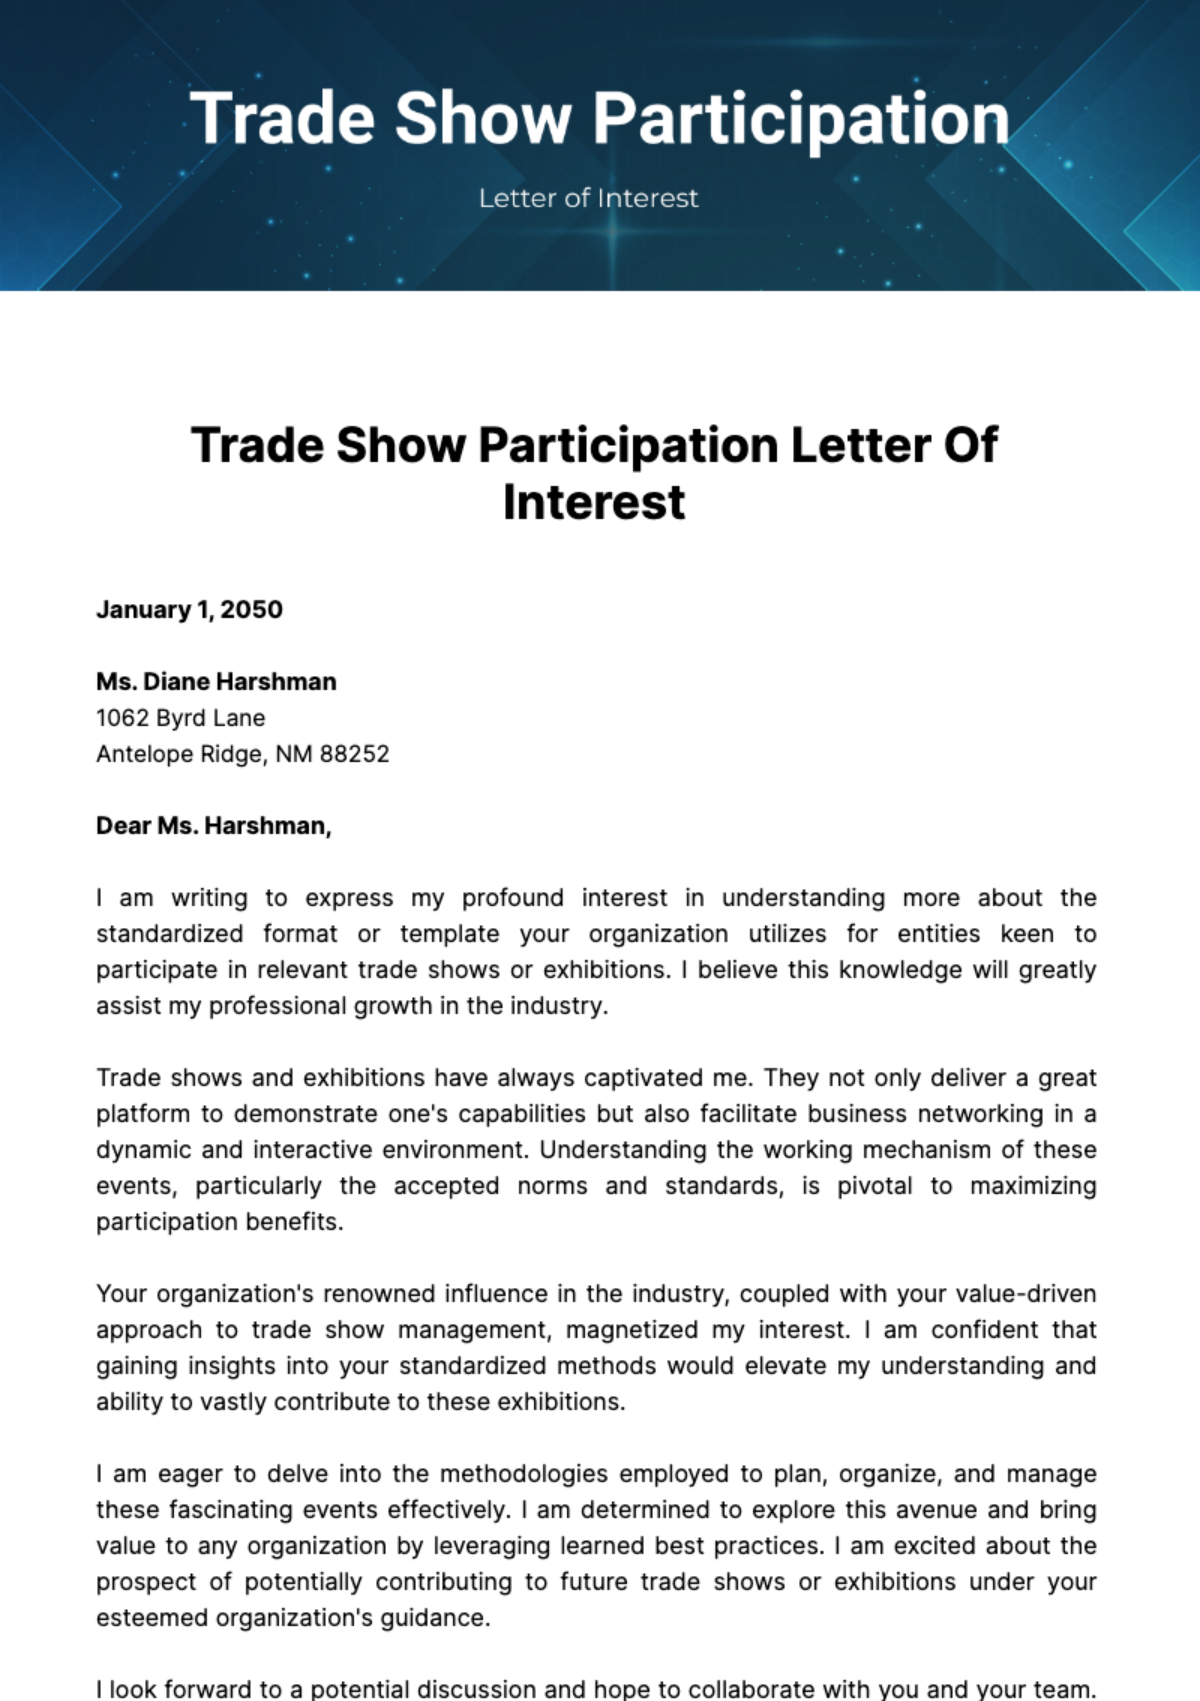 Trade Show Participation Letter of Interest Template